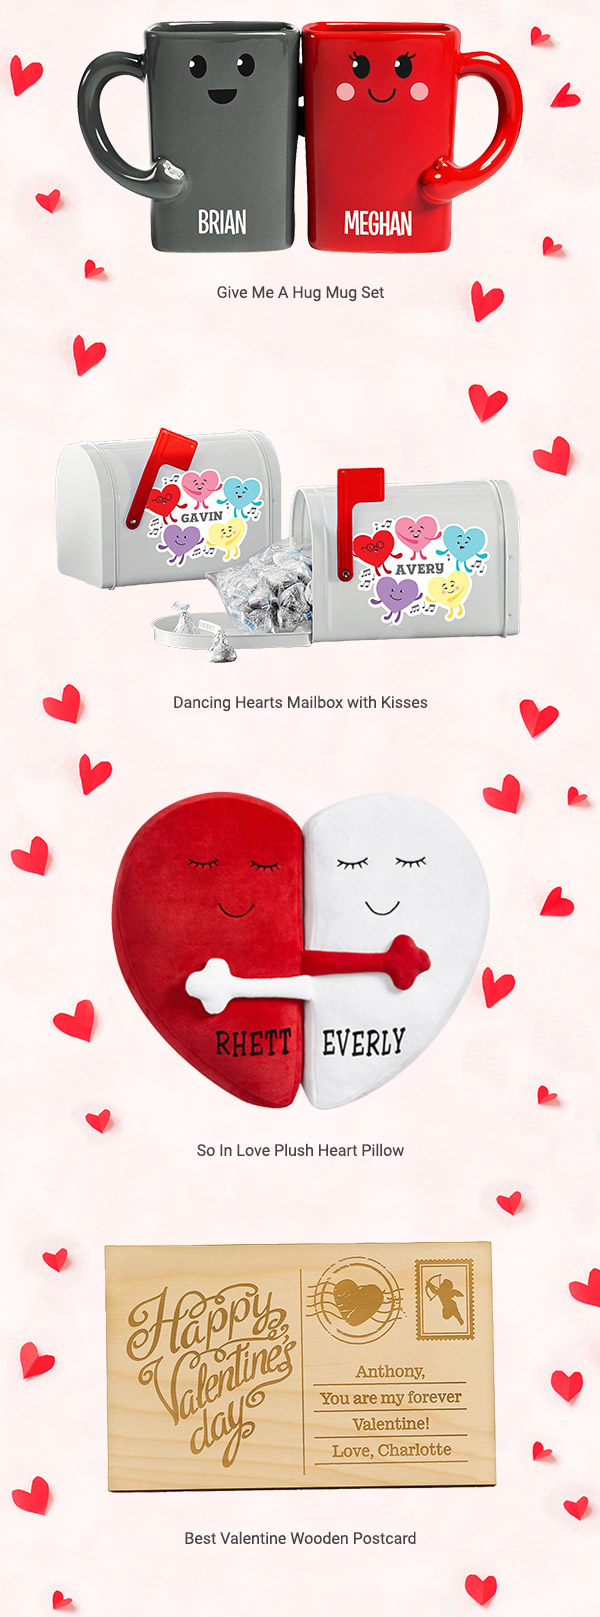 Give Me A Hug Mug Set, Dancing Hearts Mailbox with Kisses, So In Love Plush Heart Pillow, Best Valentine Wooden Postcard